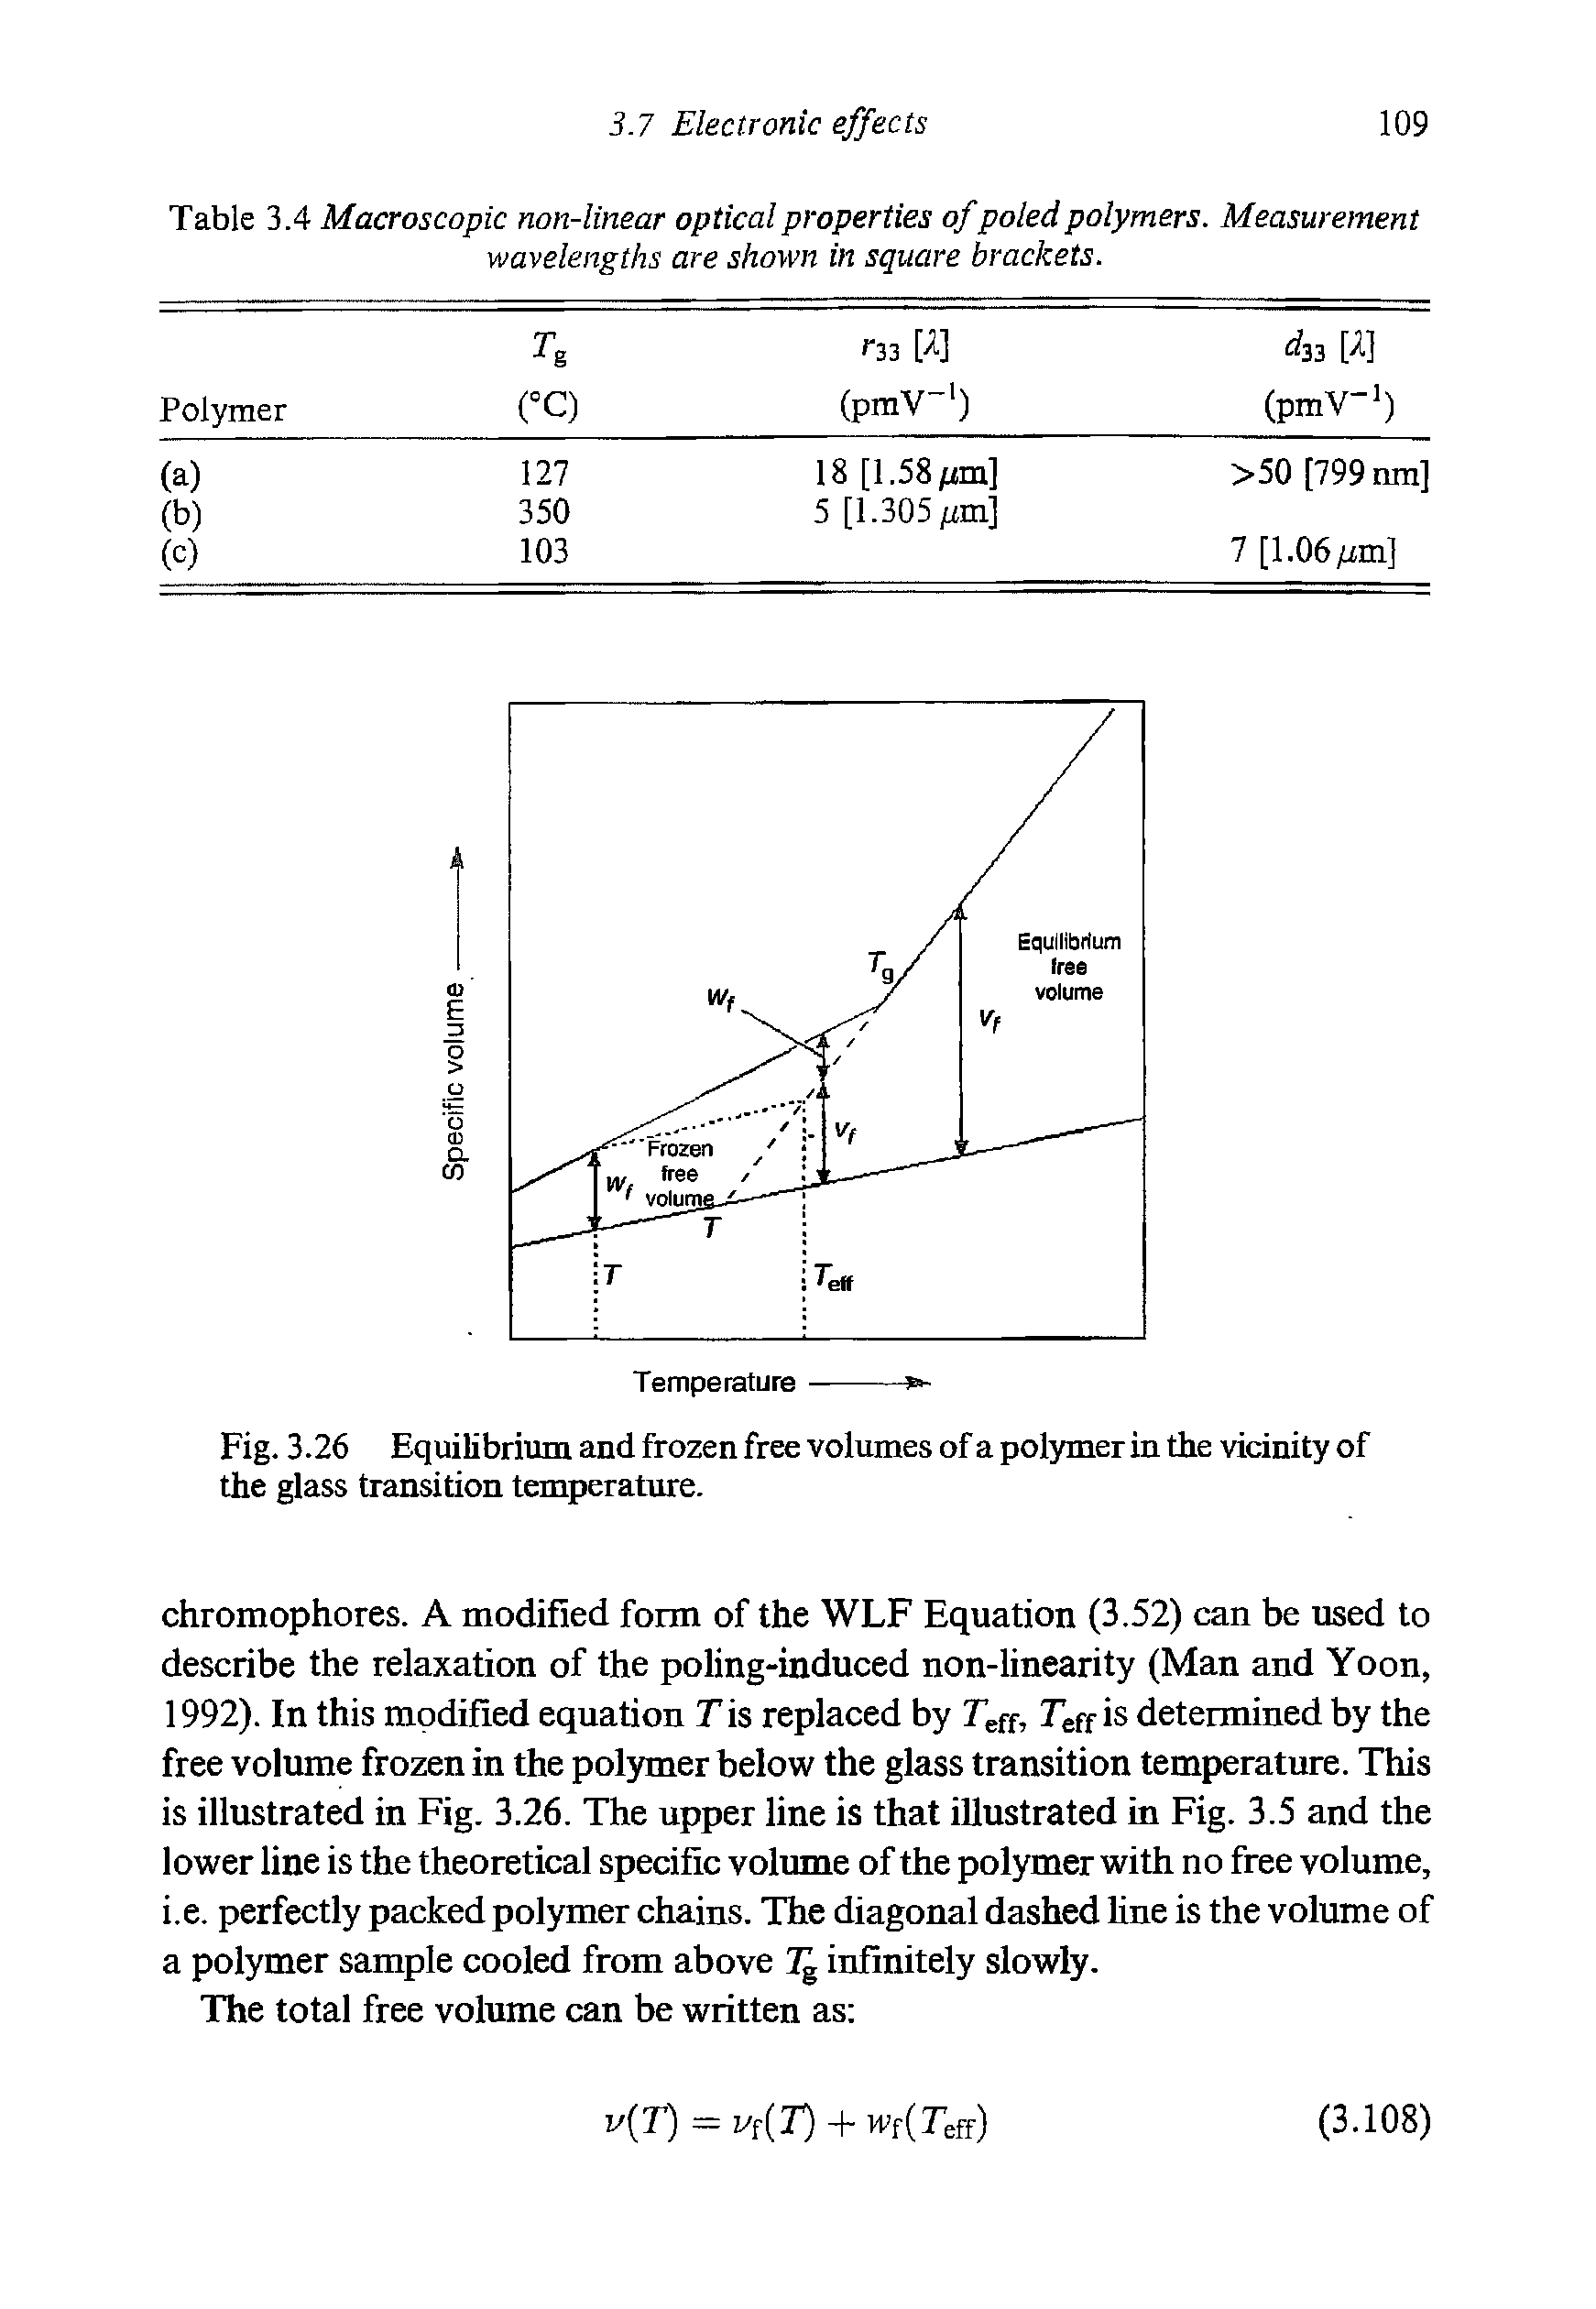 Fig. 3.26 Equilibrium and frozen free volumes of a polymer in the vicinity of the glass transition temperature.